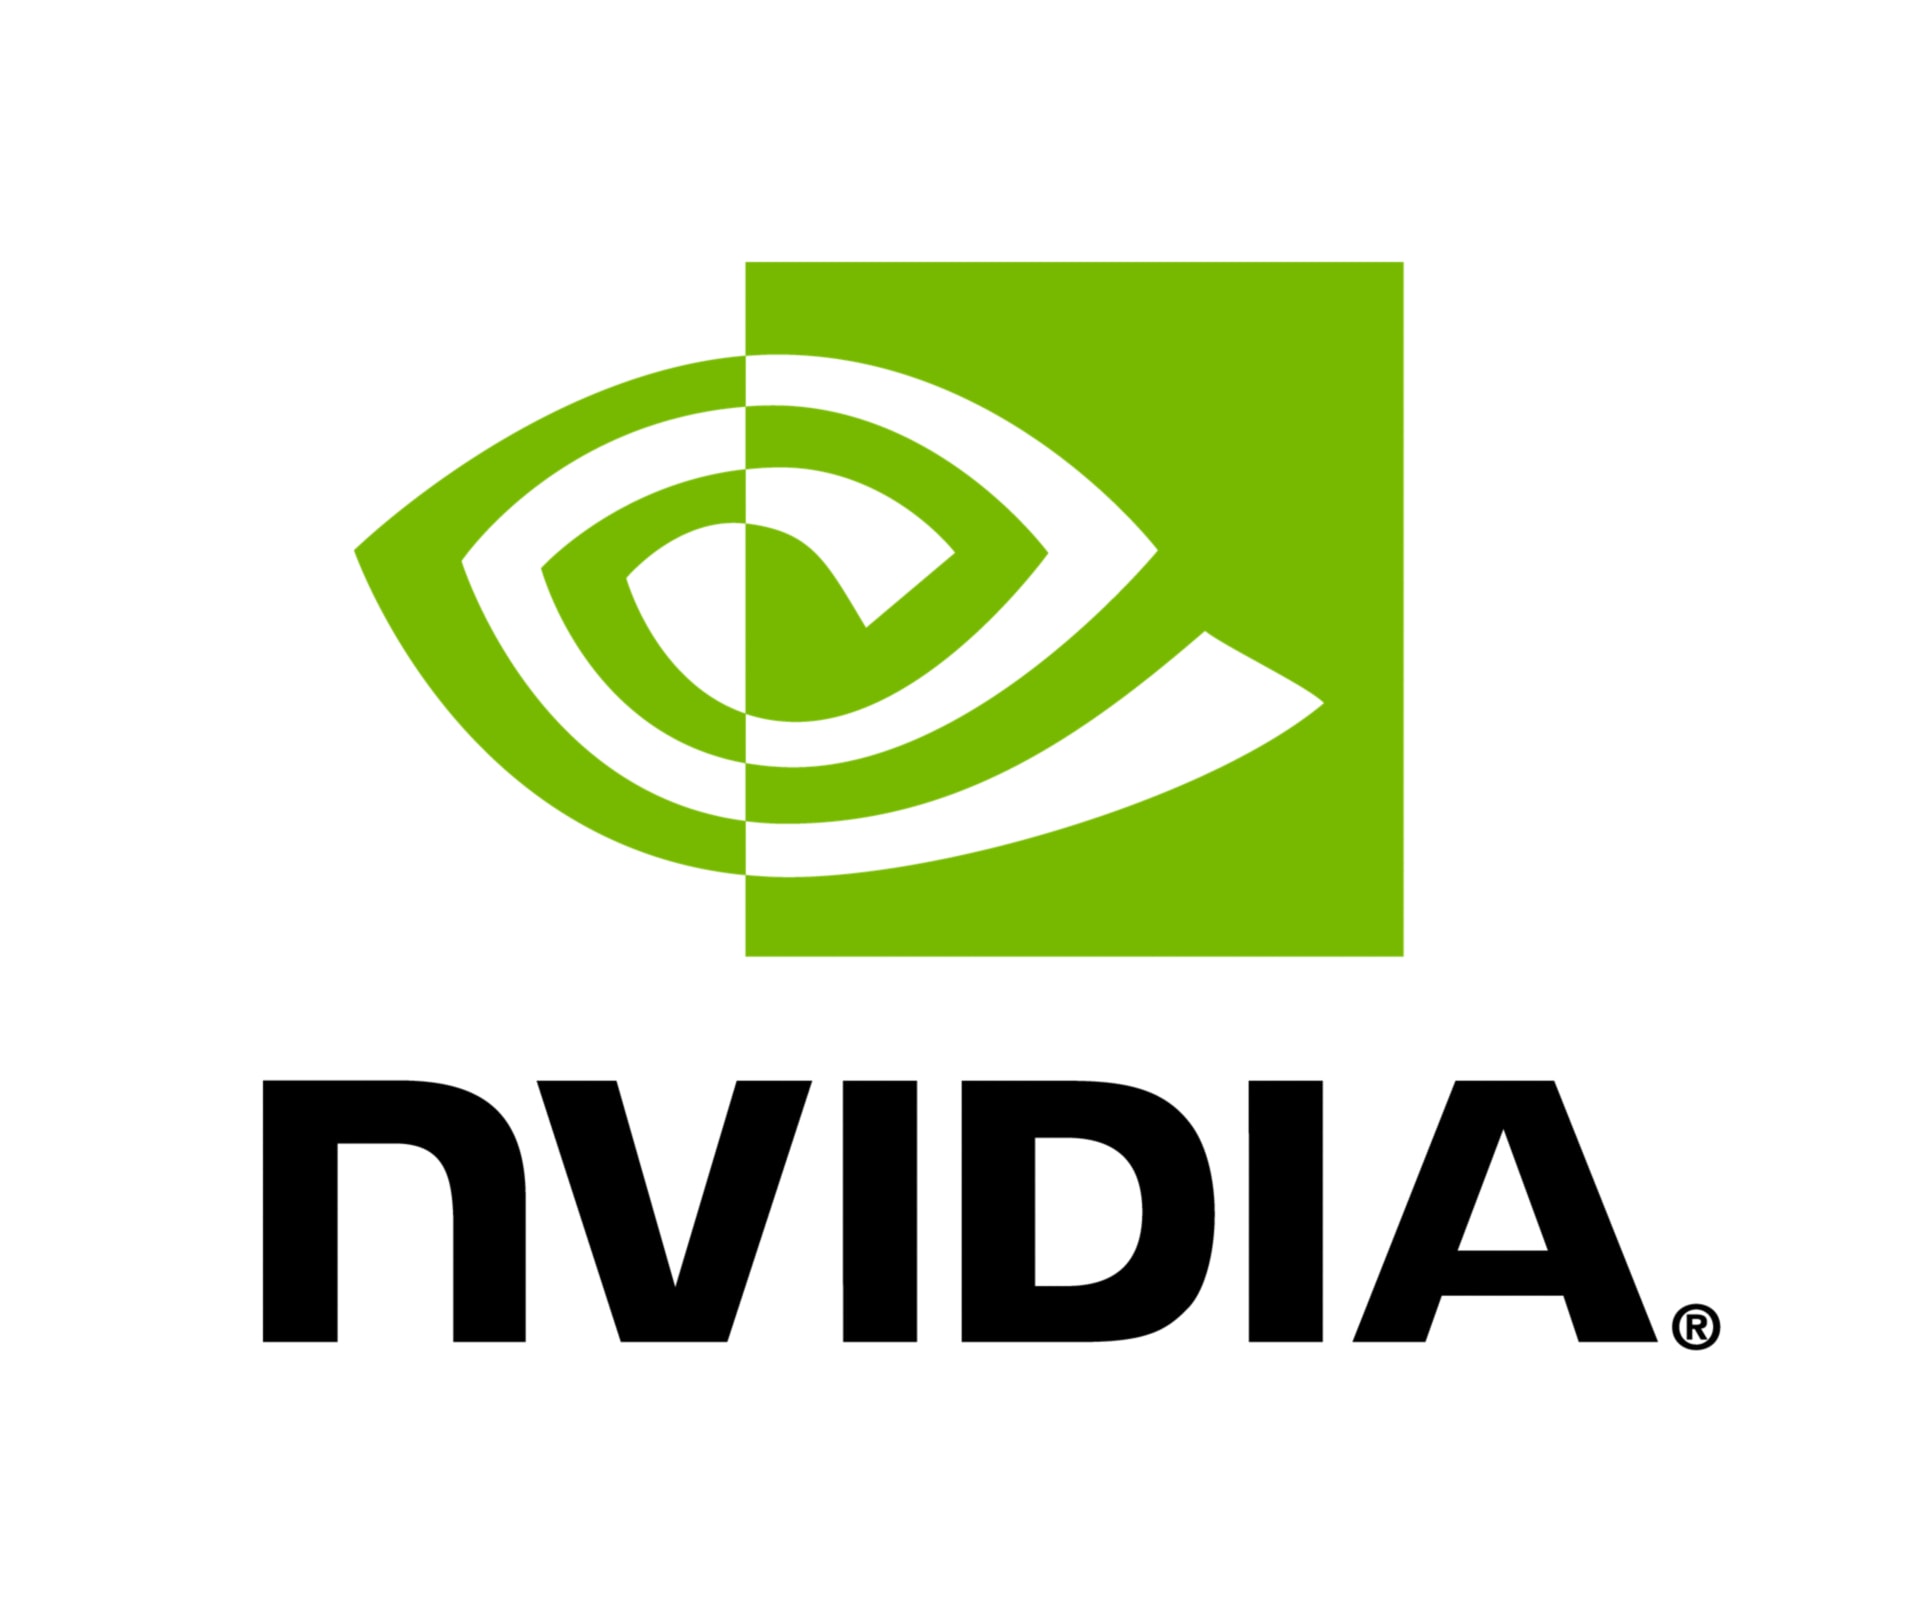 NVIDIA Grid Quadro Virtual Data Center Workstation - subscription license renewal (3 years) - 1 concurrent user